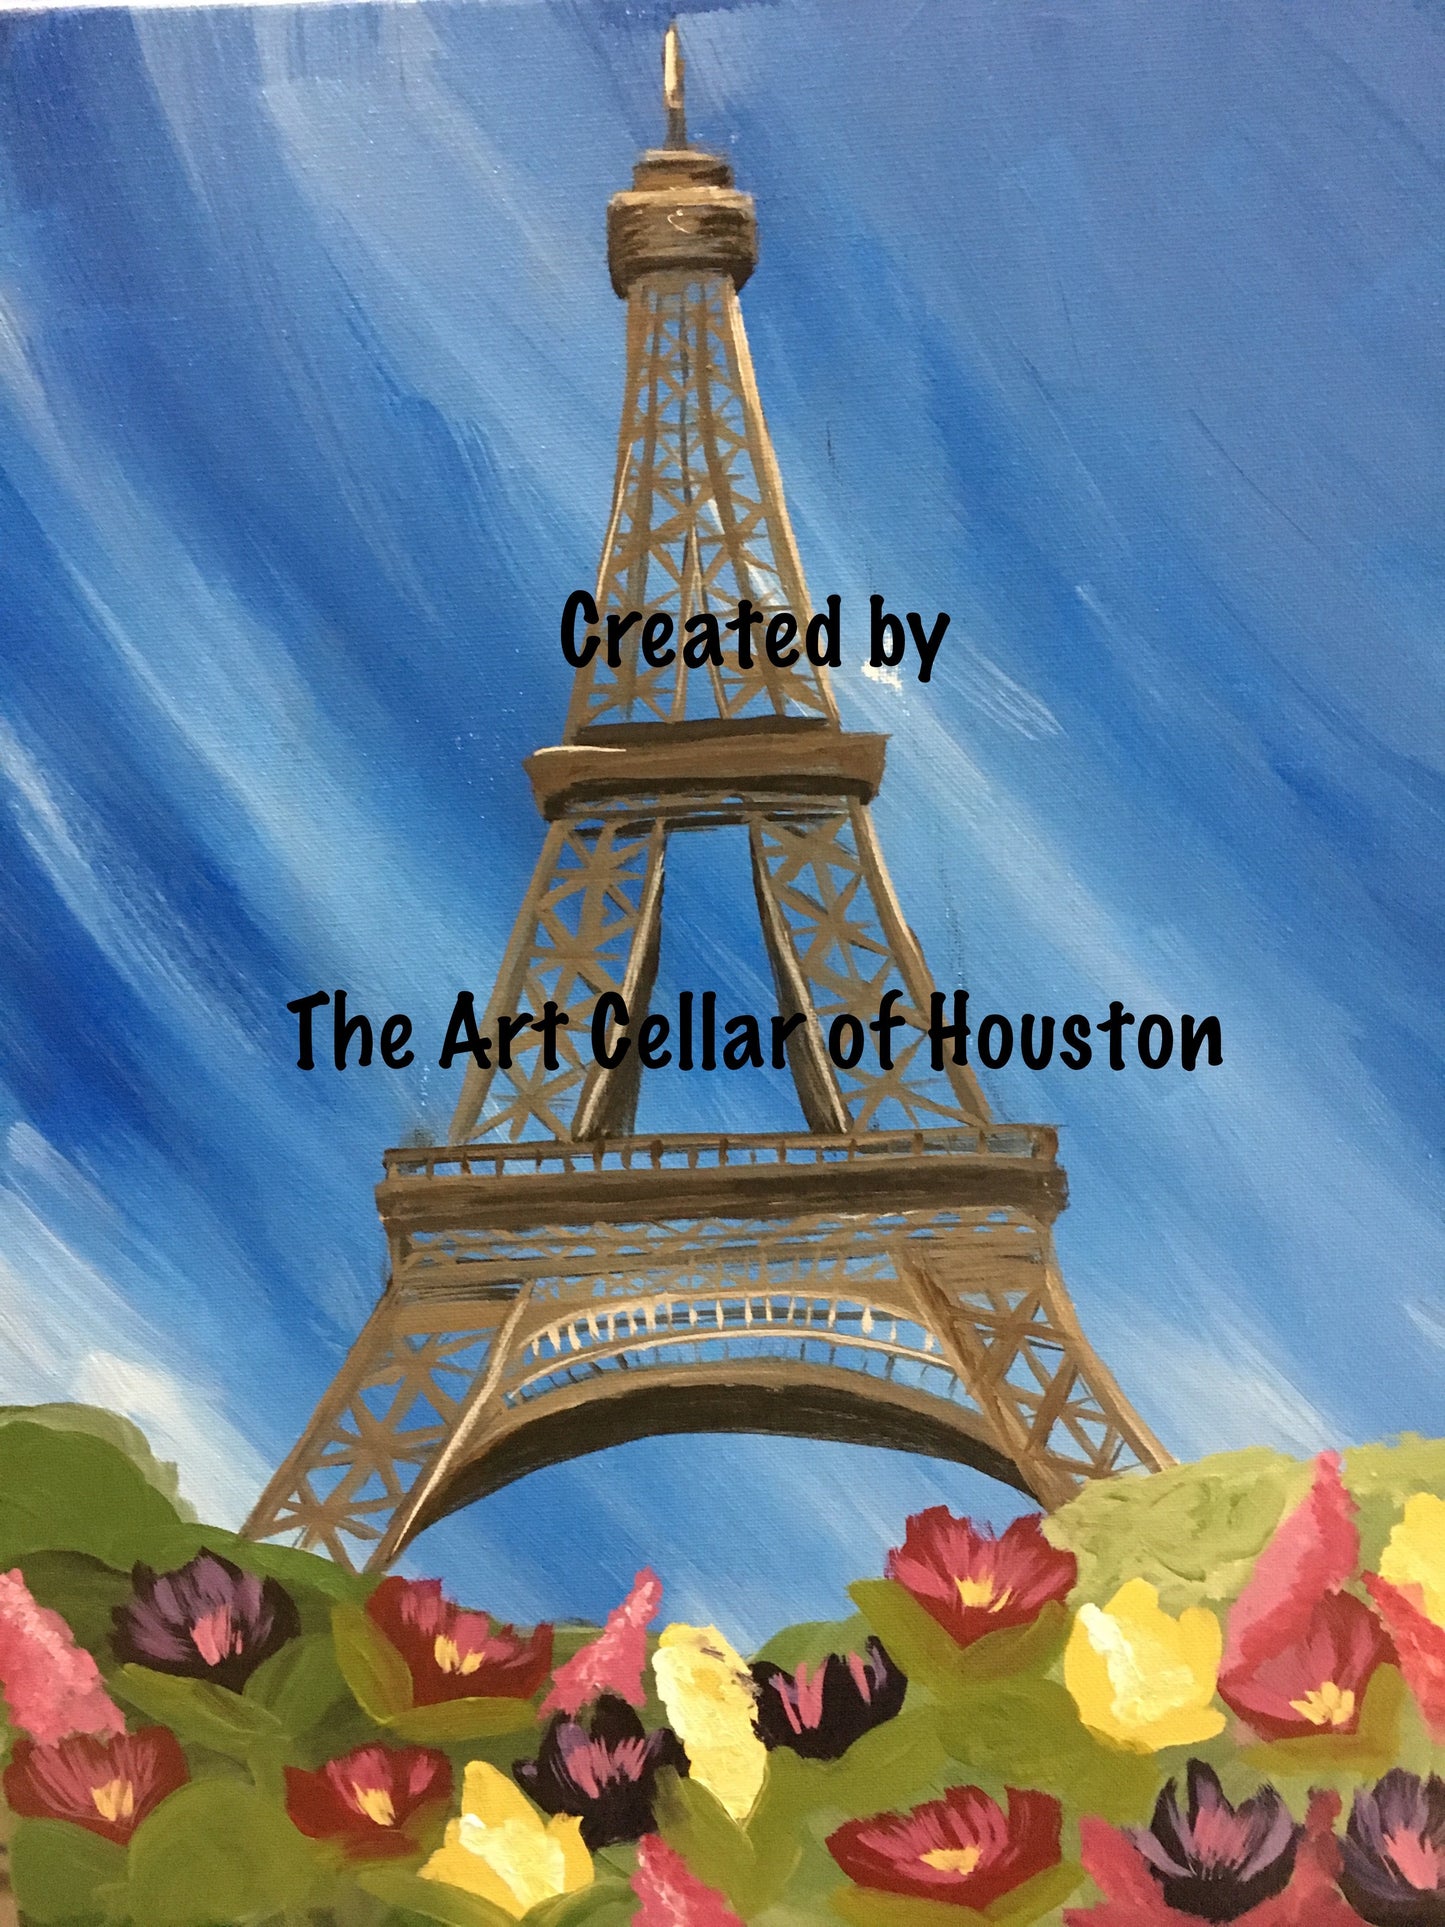 Wed, Sep 28th, 4-6P “Sketch the Eiffel Tower” Public Houston Kids Weekly Art Class